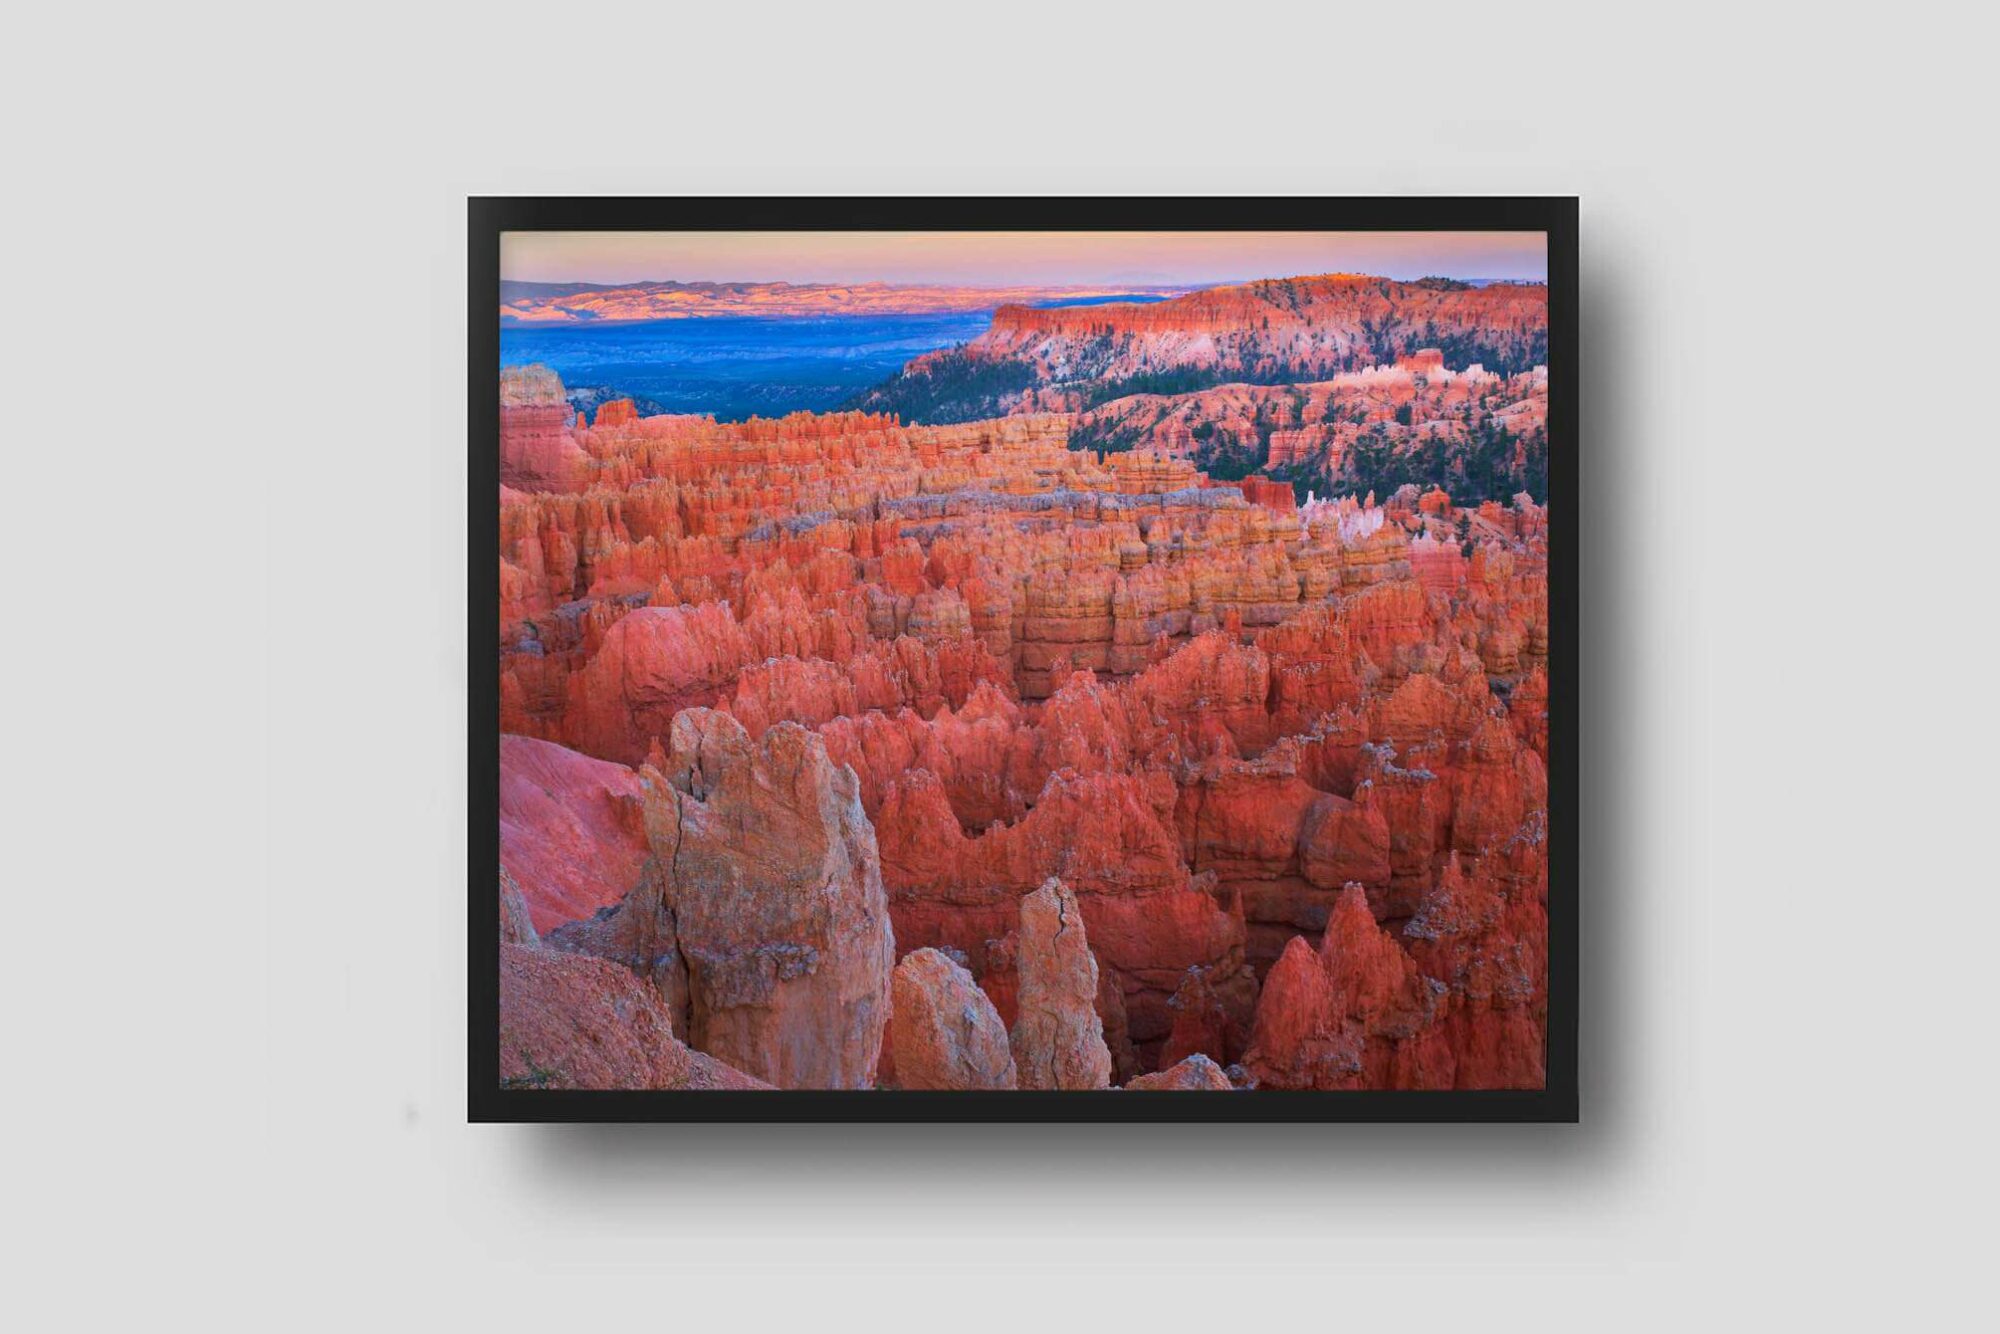 Framed photo of bryce canyon